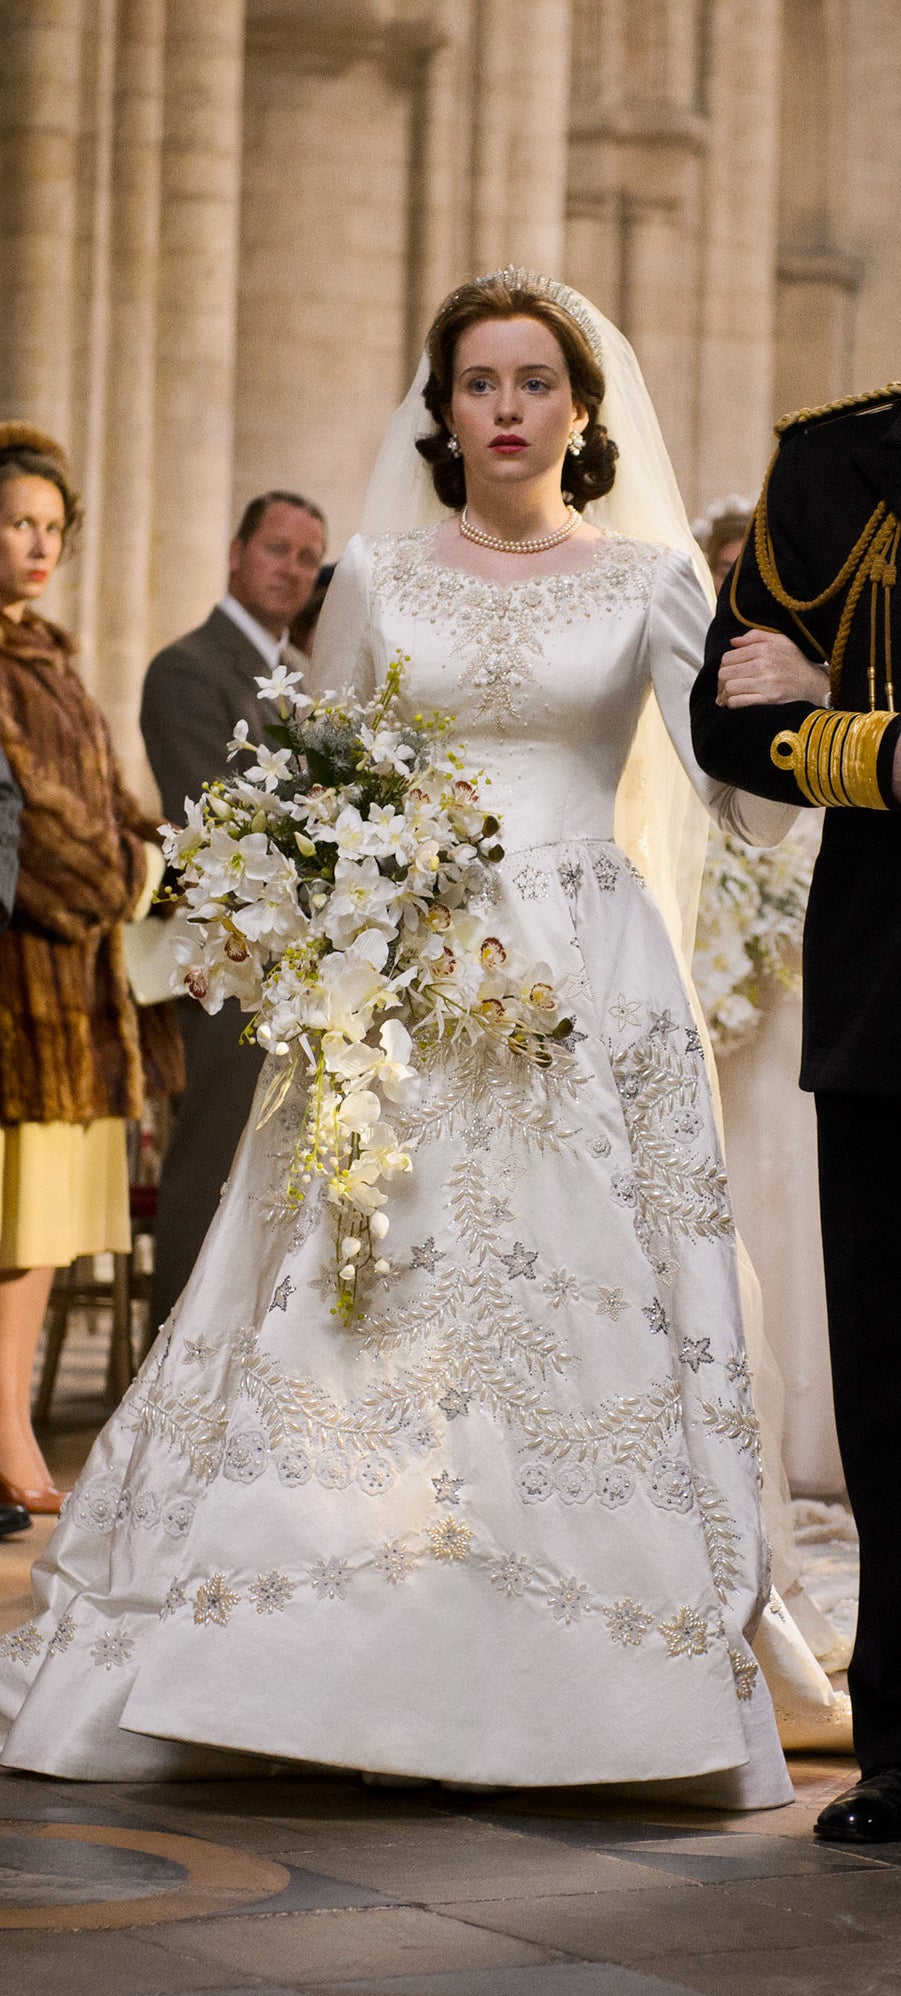 the actor playing Queen Elizabeth II wearing a similar dress